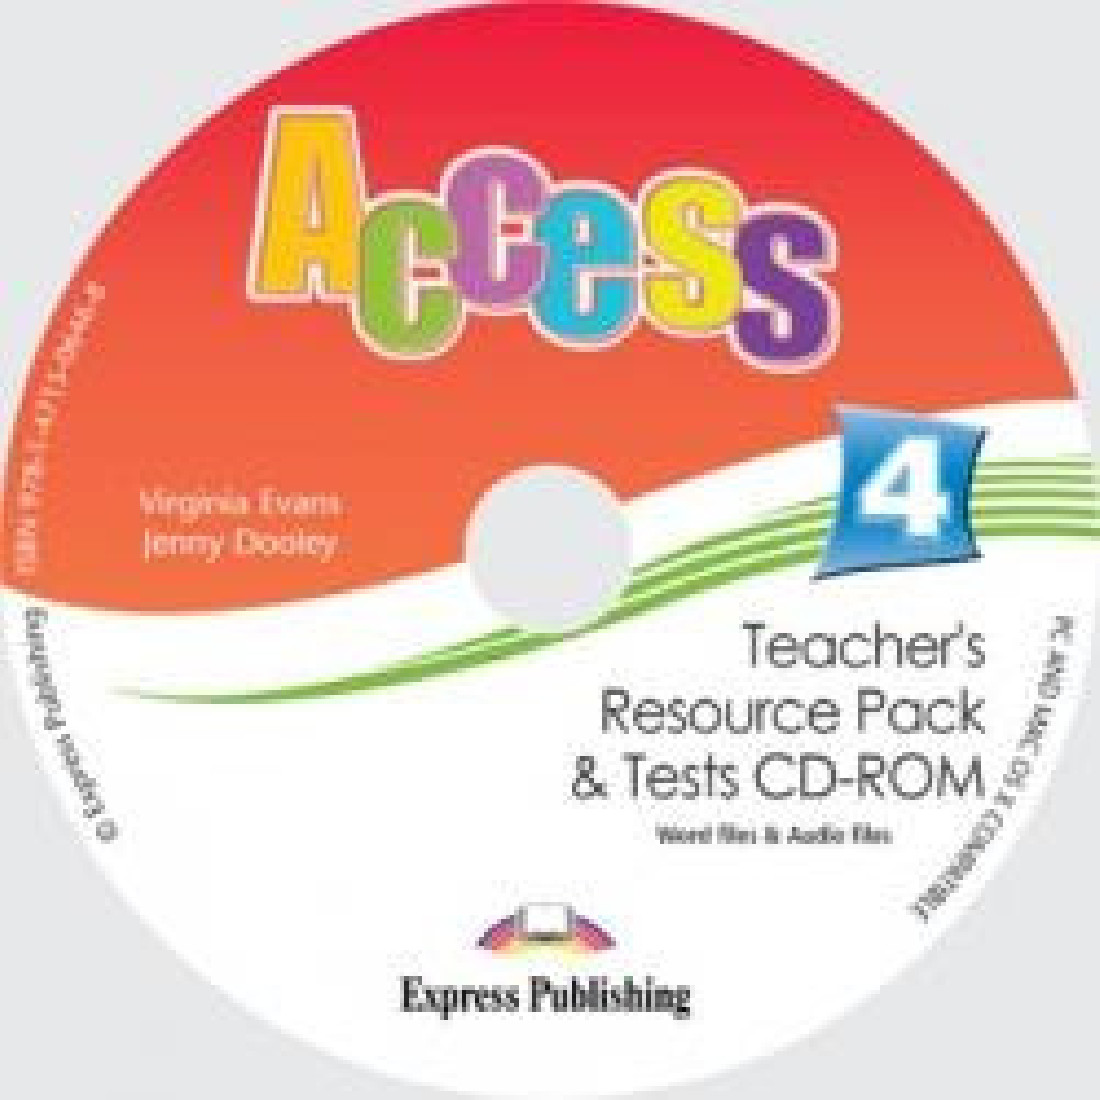 ACCESS 4 TCHRS RESOURCE PACK (+ TESTS) CD-ROM